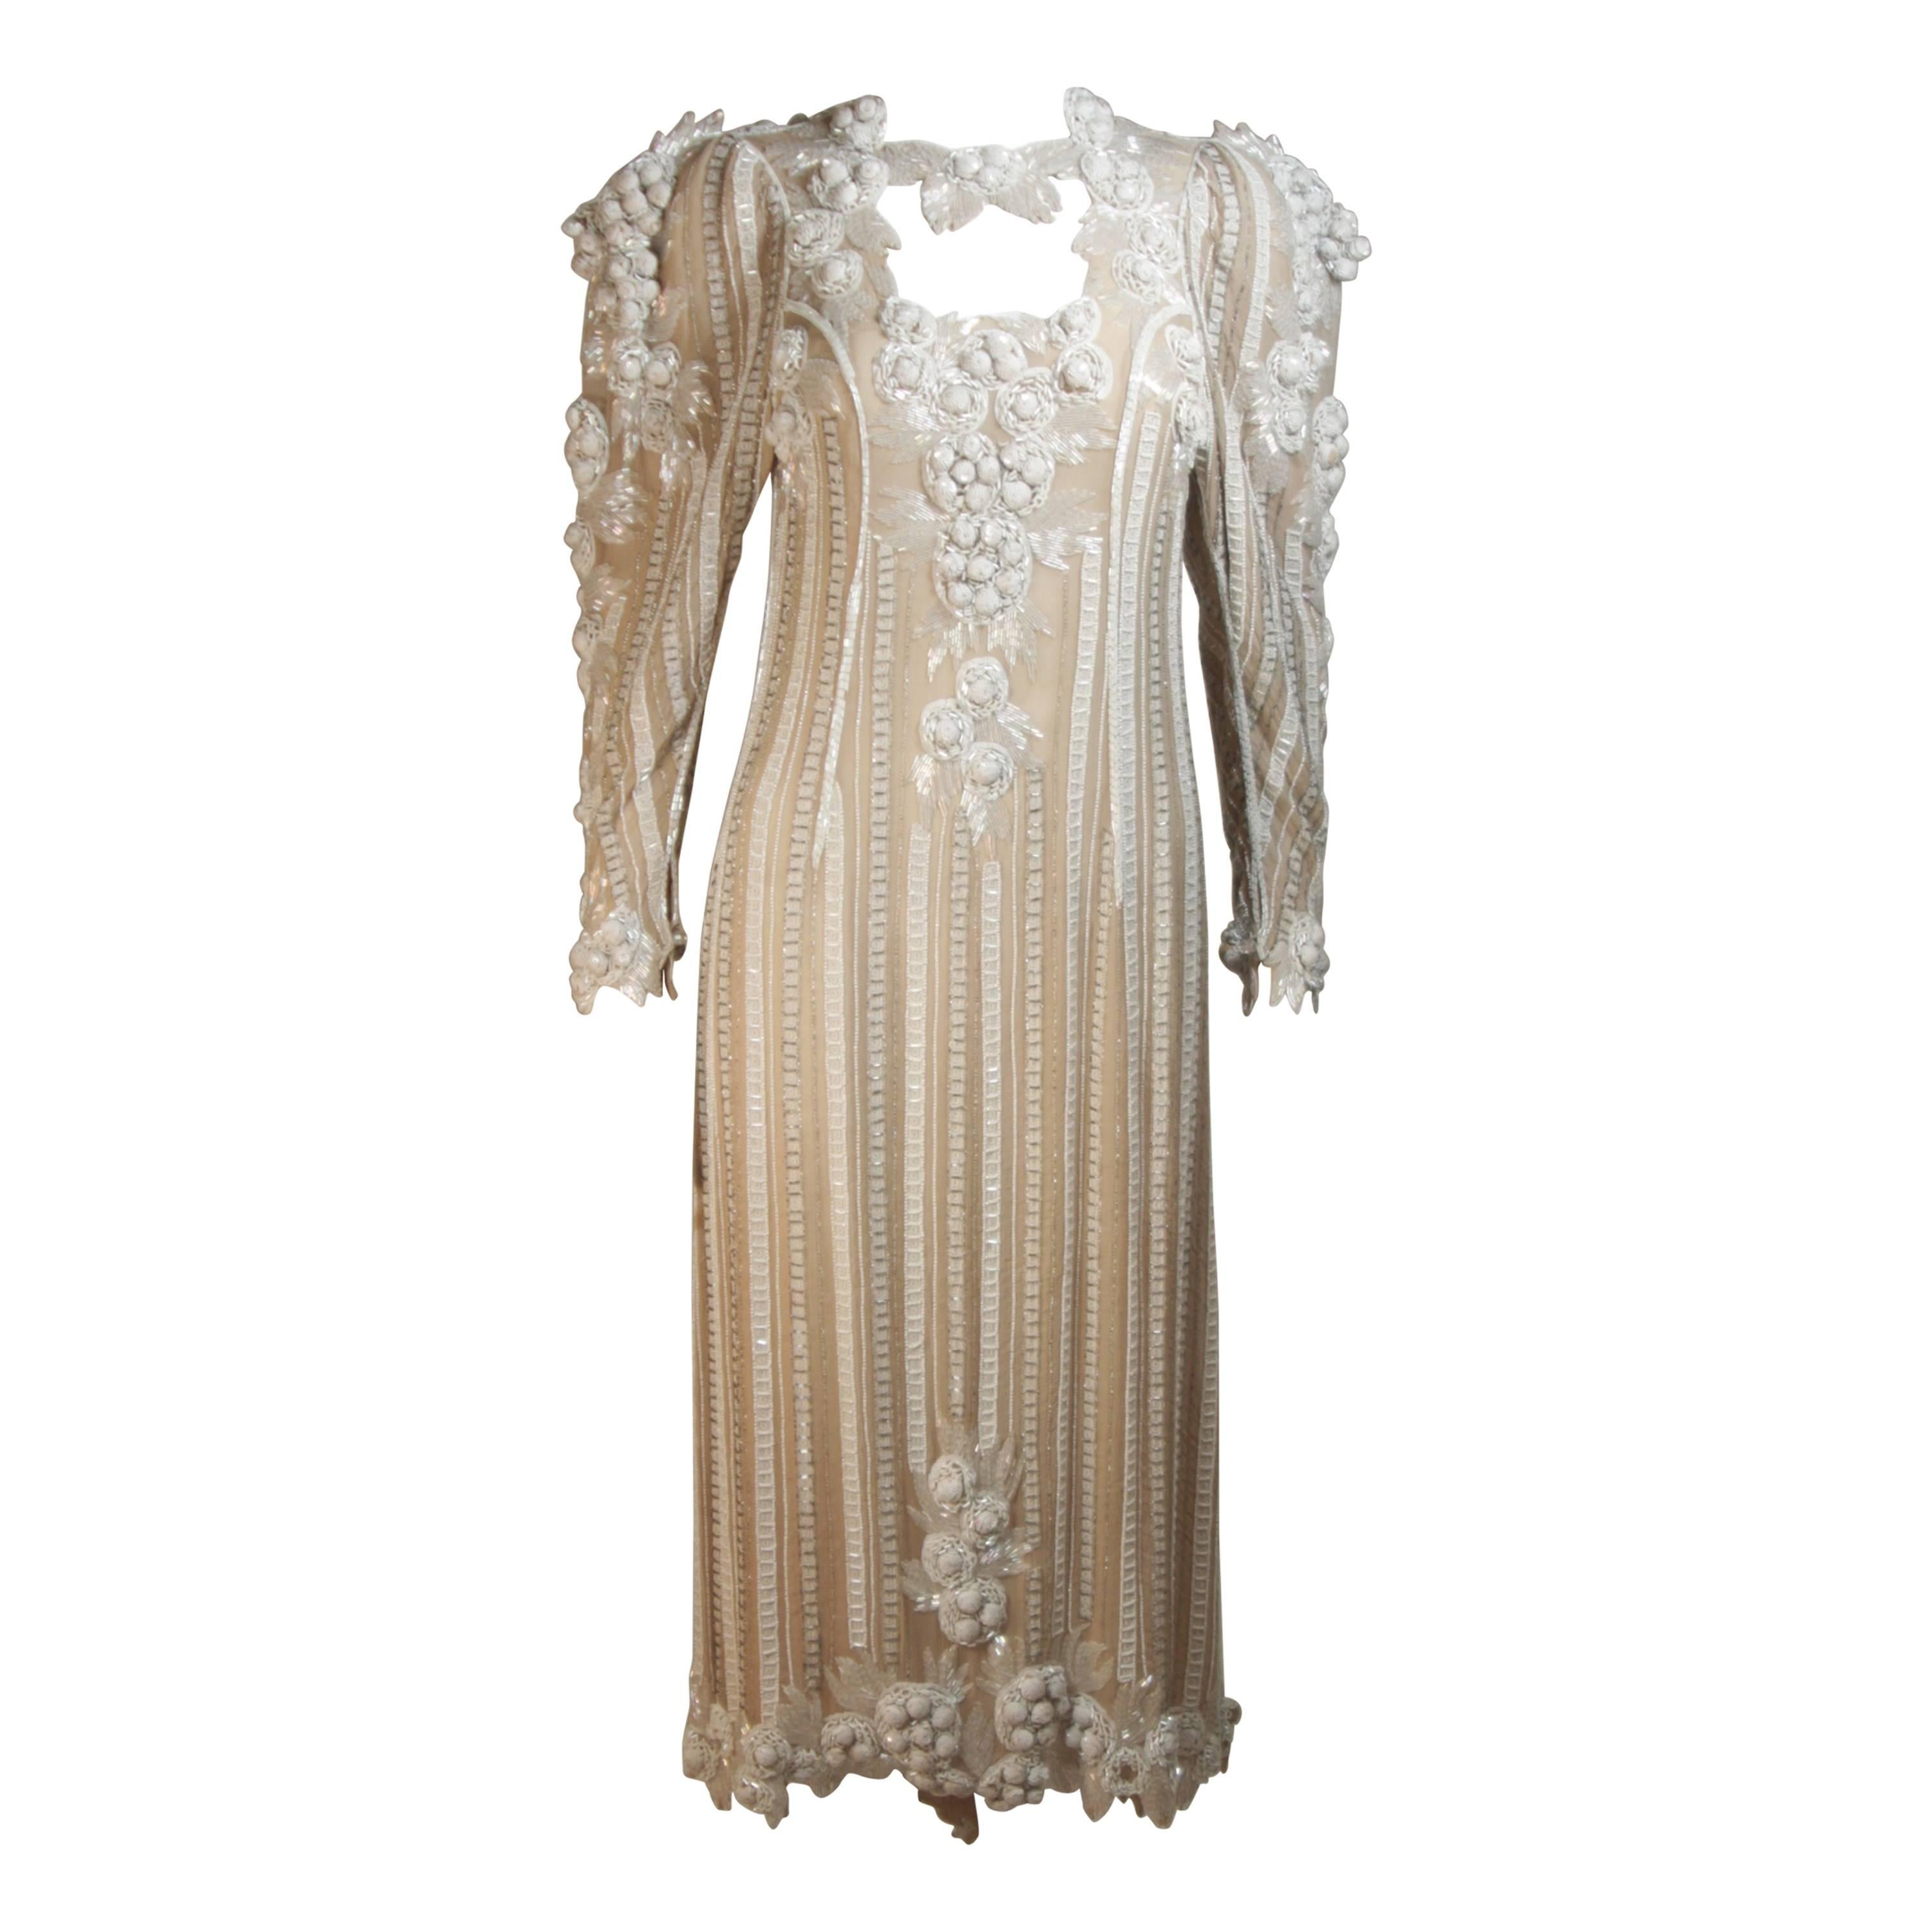 APROPOS 1980's Ivory Beaded Gown with Shoulder Accents Size 6-8 For Sale